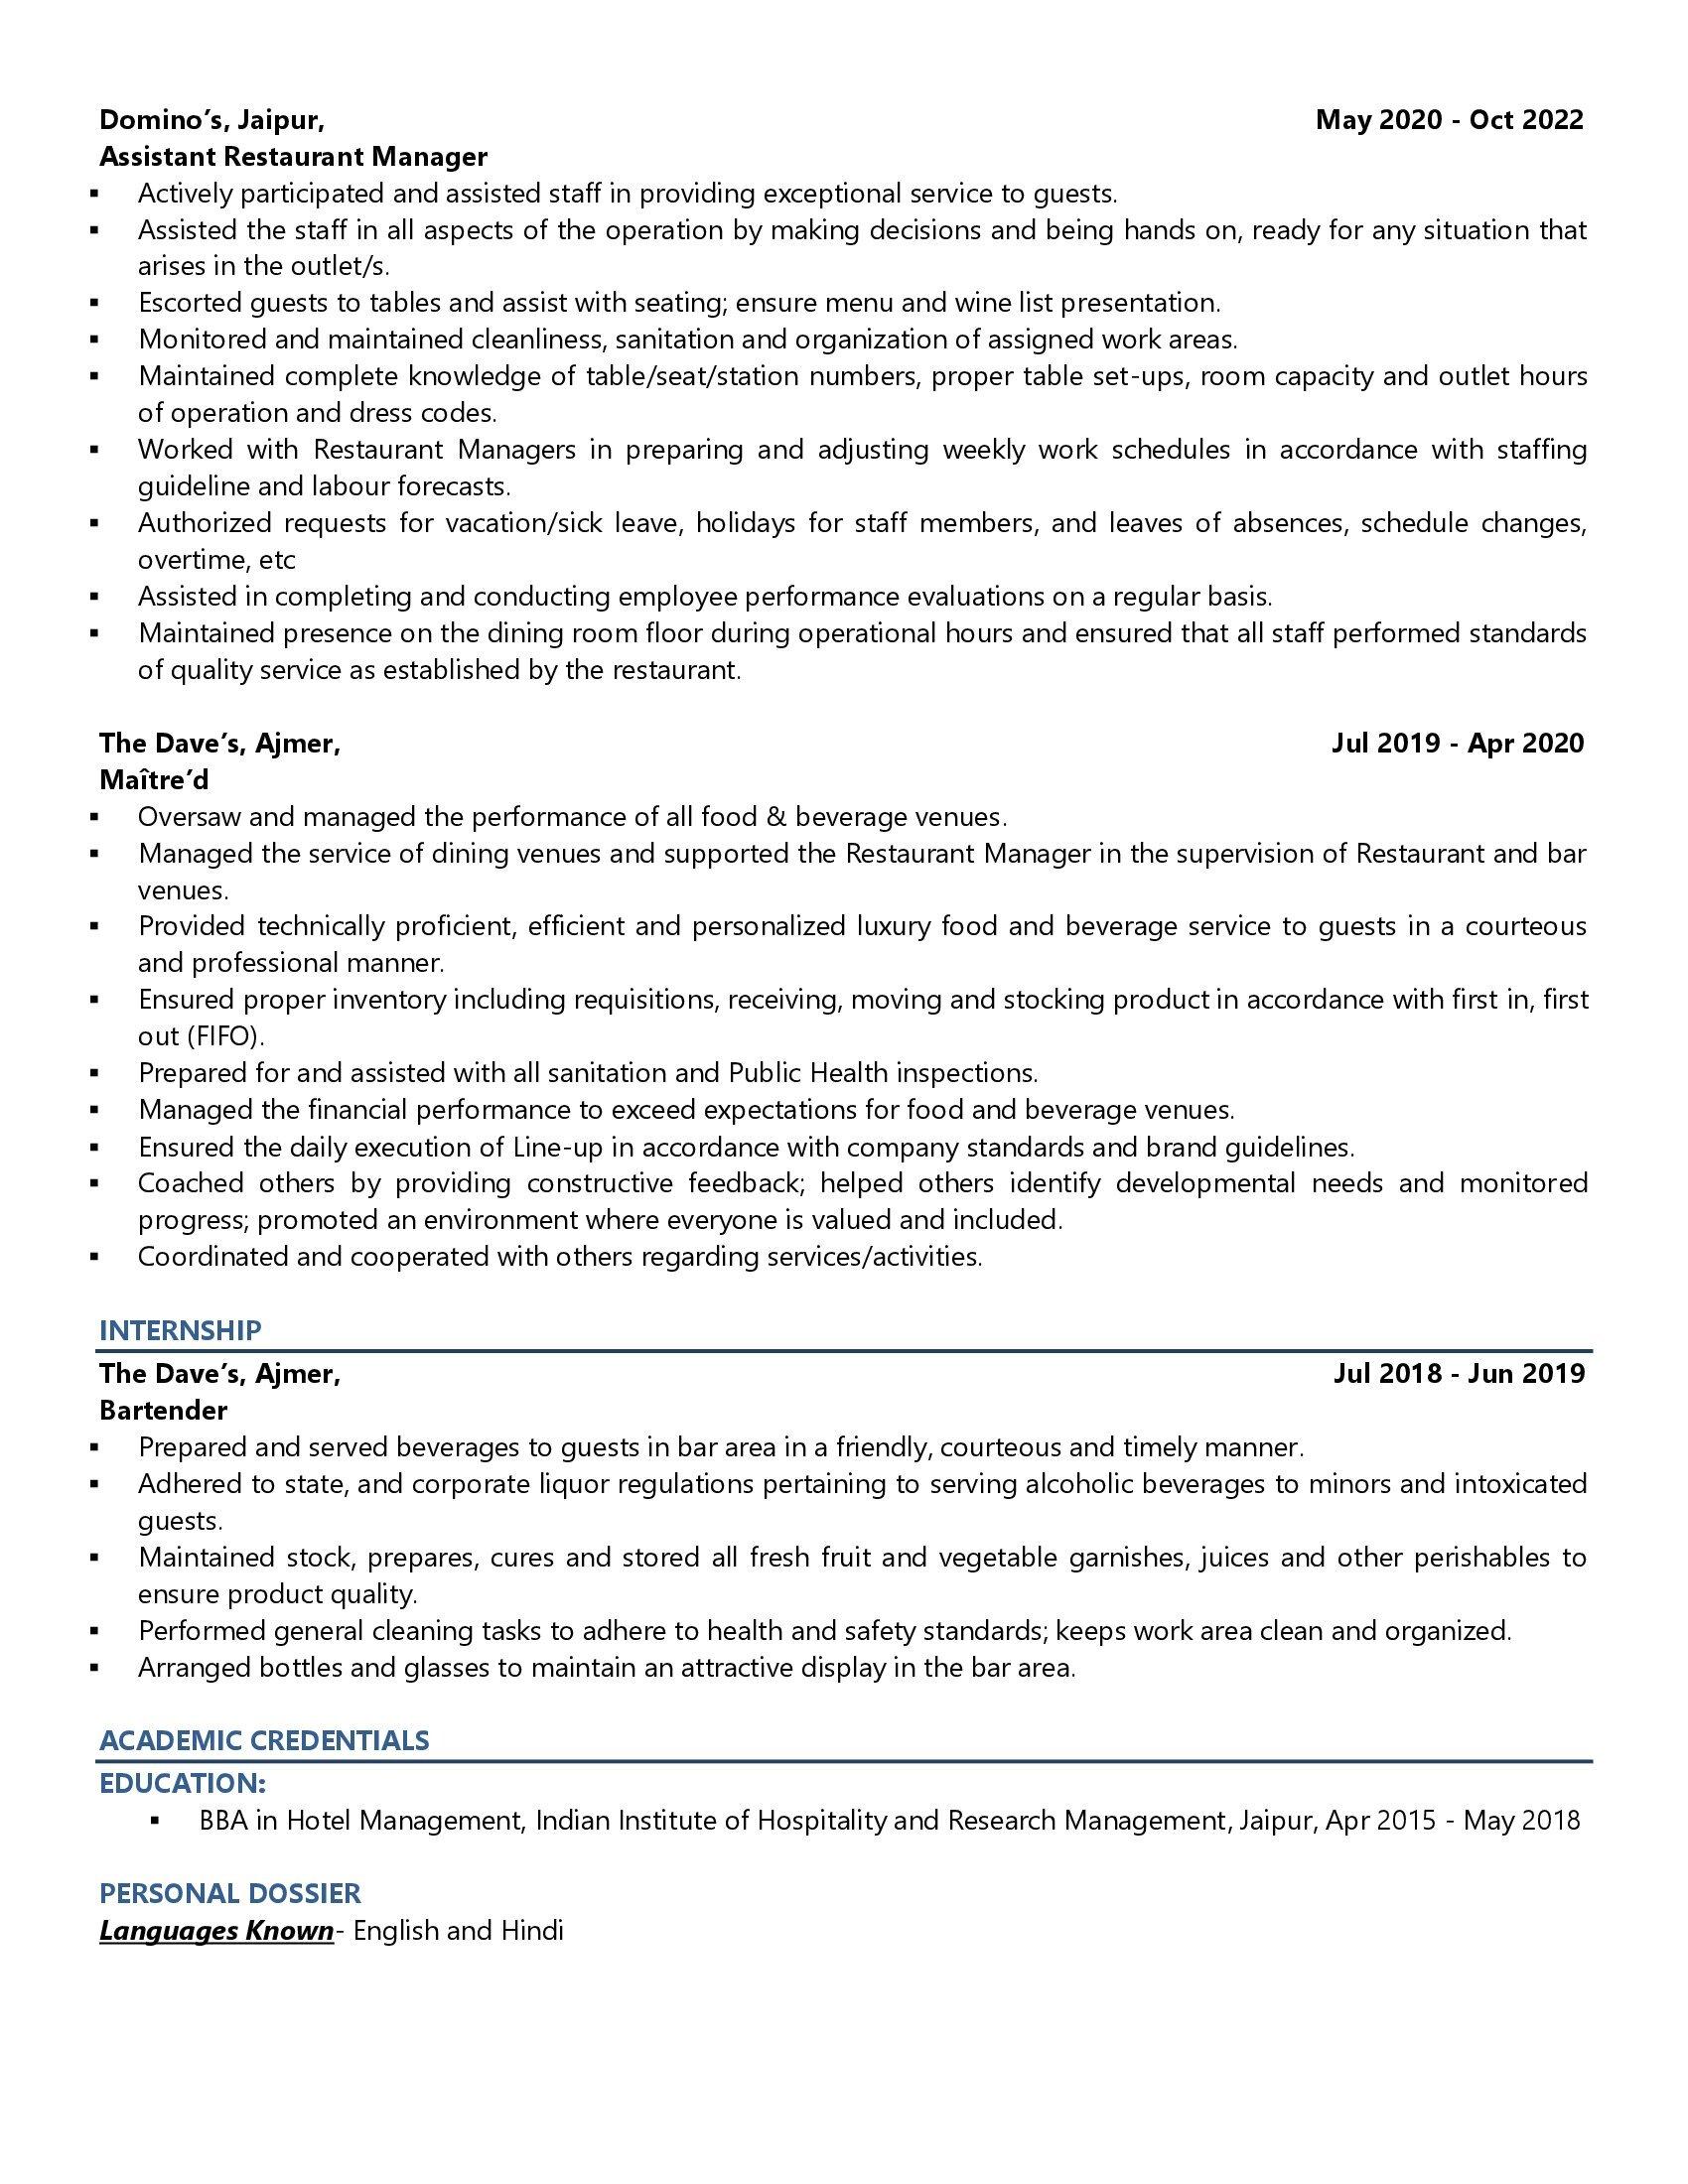 Restaurant Manager - Resume Example & Template